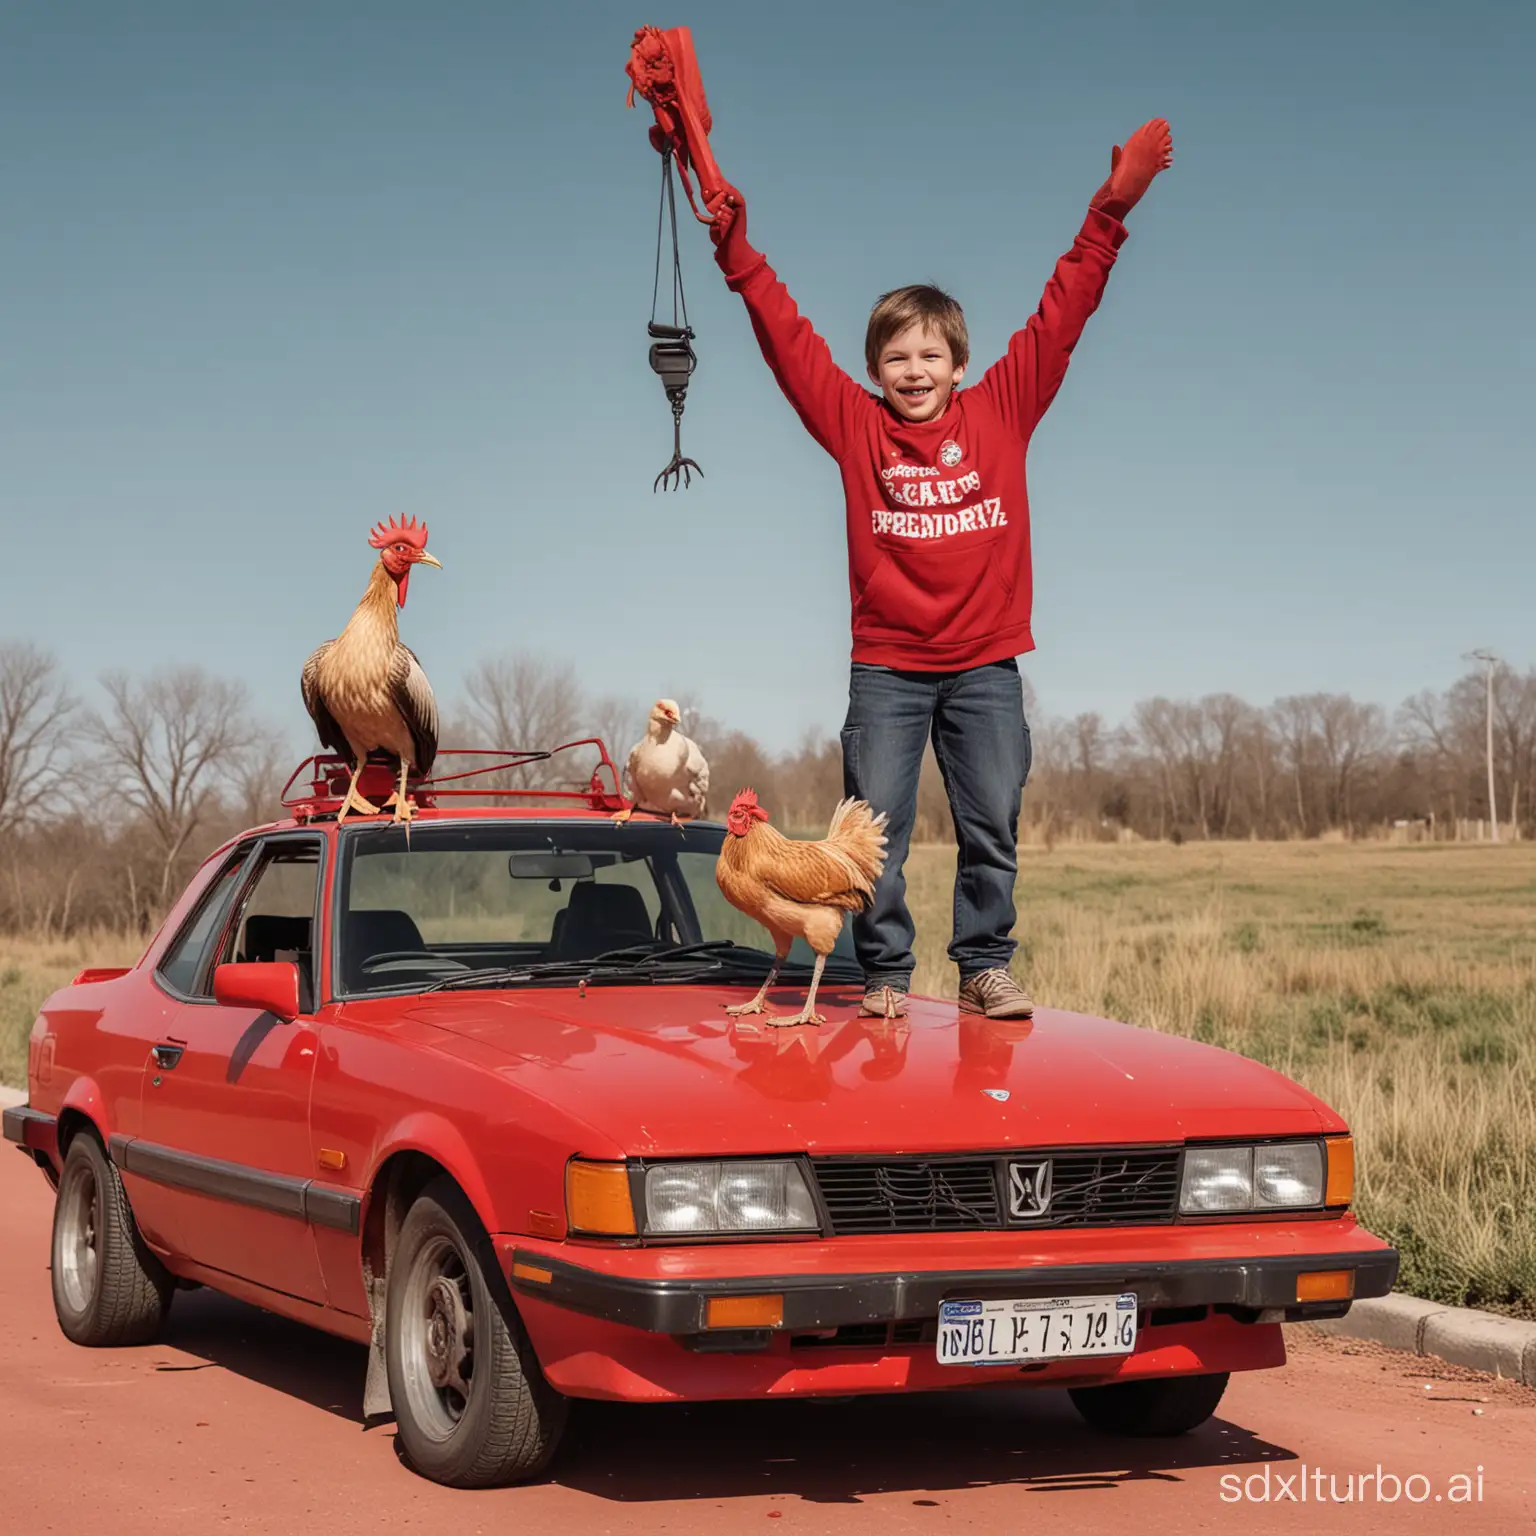 disabled kid with a crane in left hand and chicken in another is standing on top of a red car hood. Text says "freedomz"